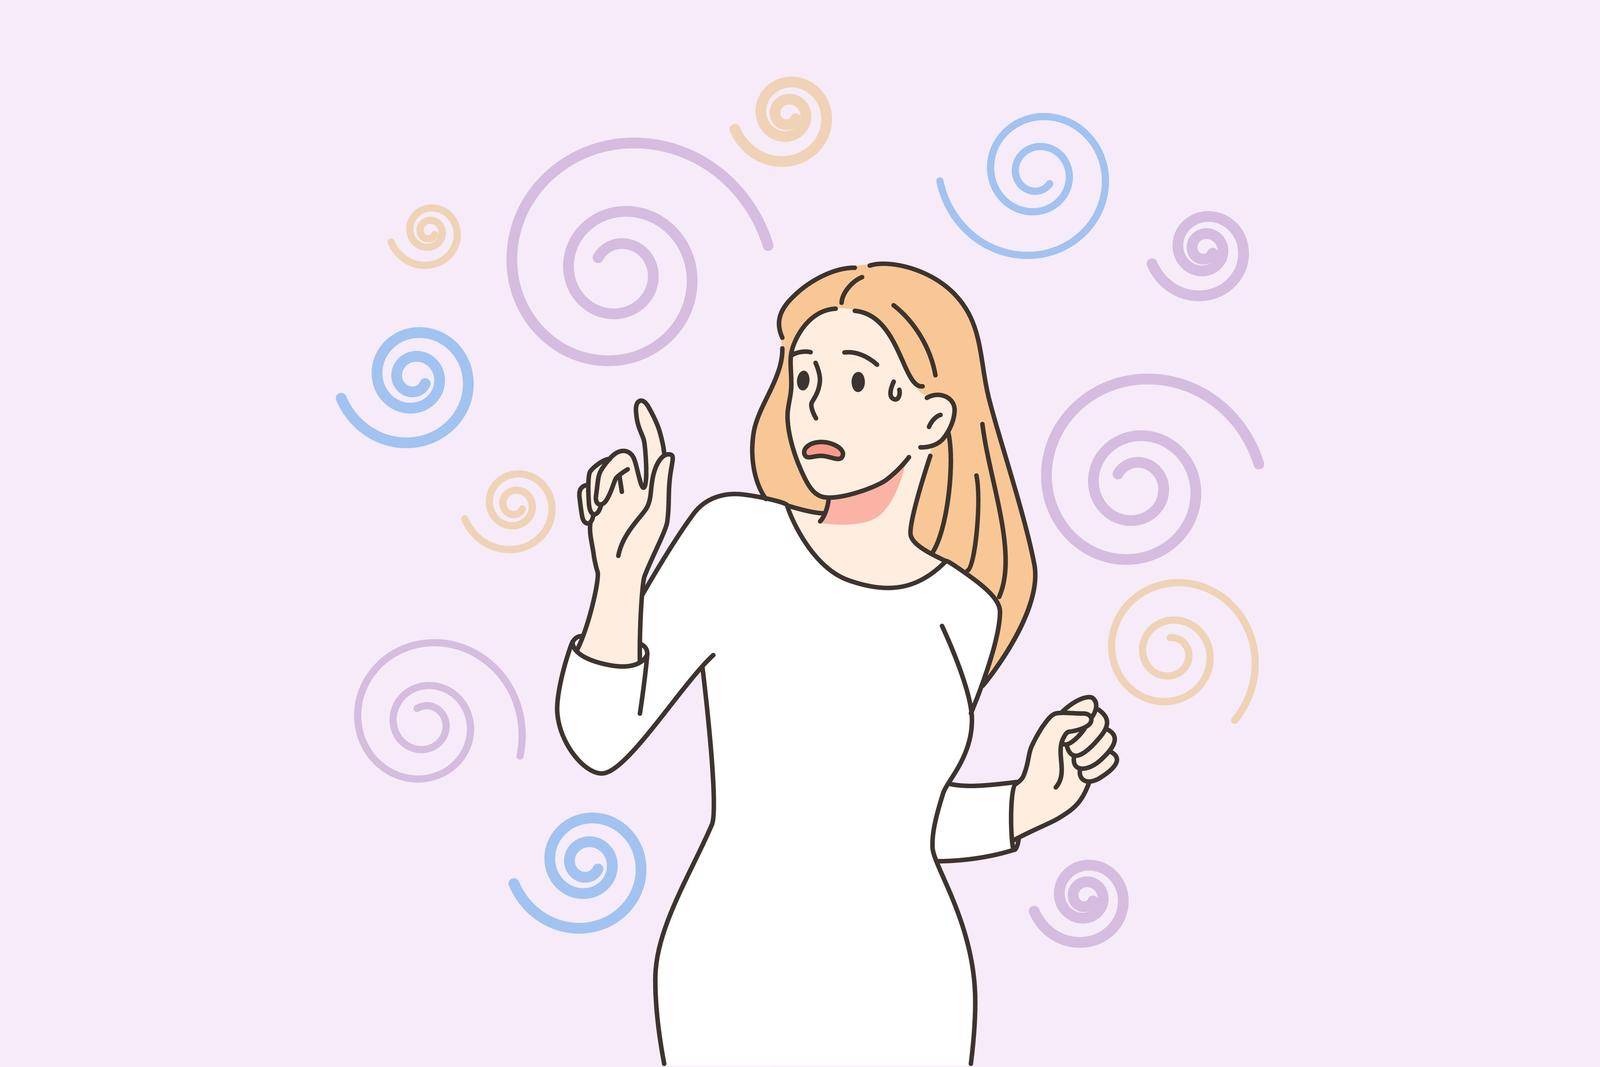 Stressed woman suffer from toxic thoughts in head. Unhappy distressed female struggle repetitive mind scenarios. Mental problem concept. Vector illustration.